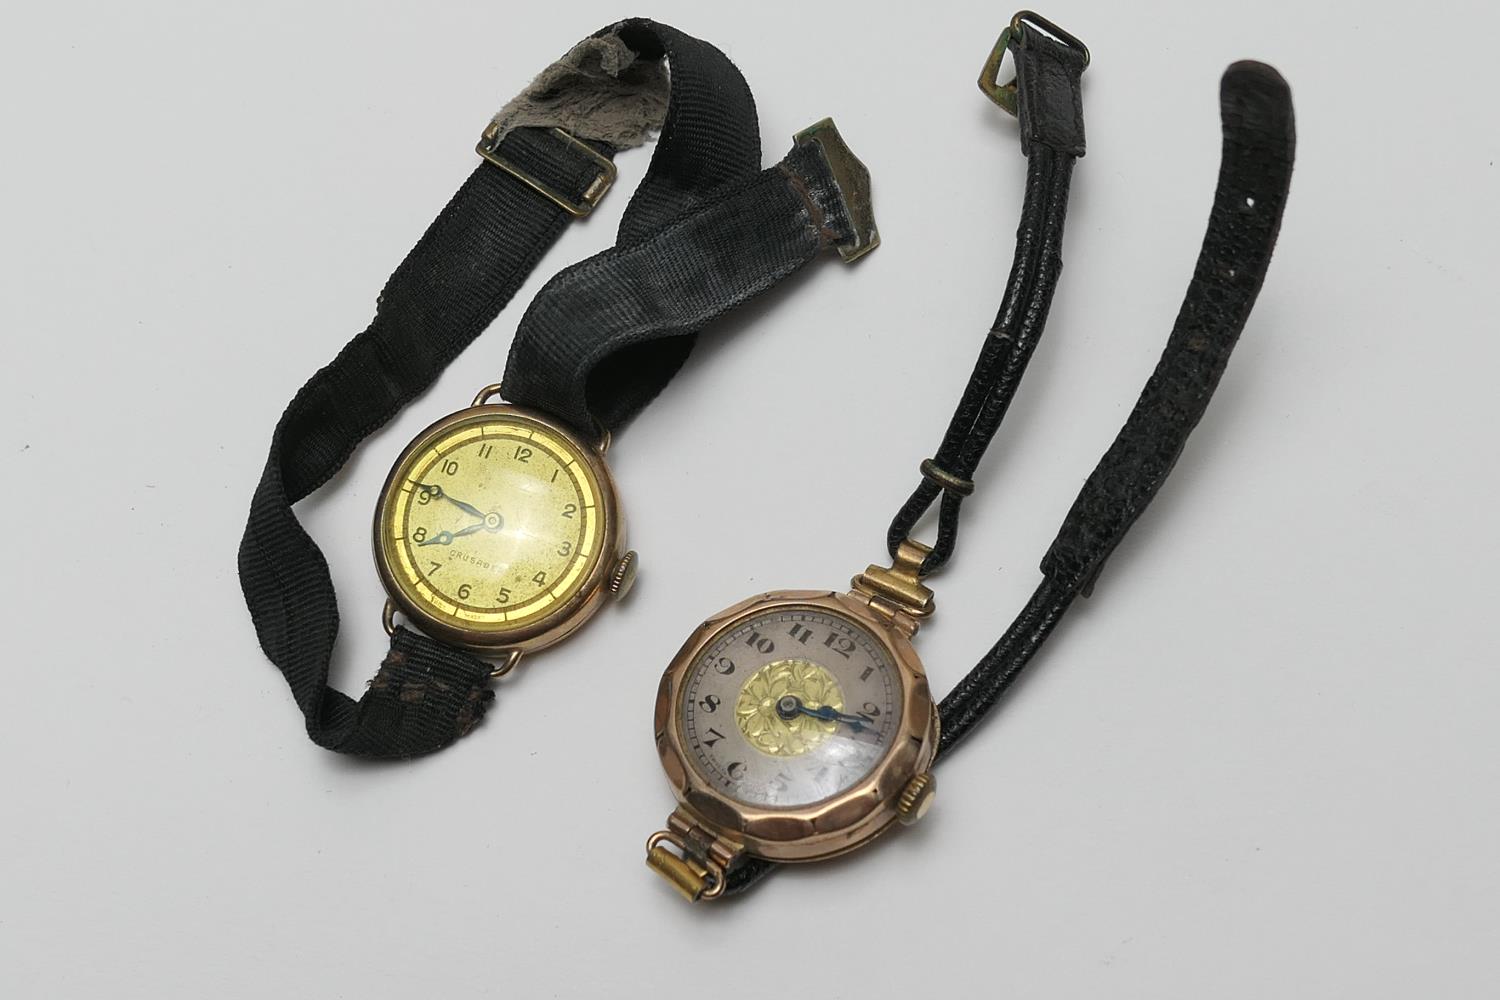 Two ladies' vintage 9ct gold cased wristwatches, circa 1920s-40s, 25mm and 23mm diameter, both